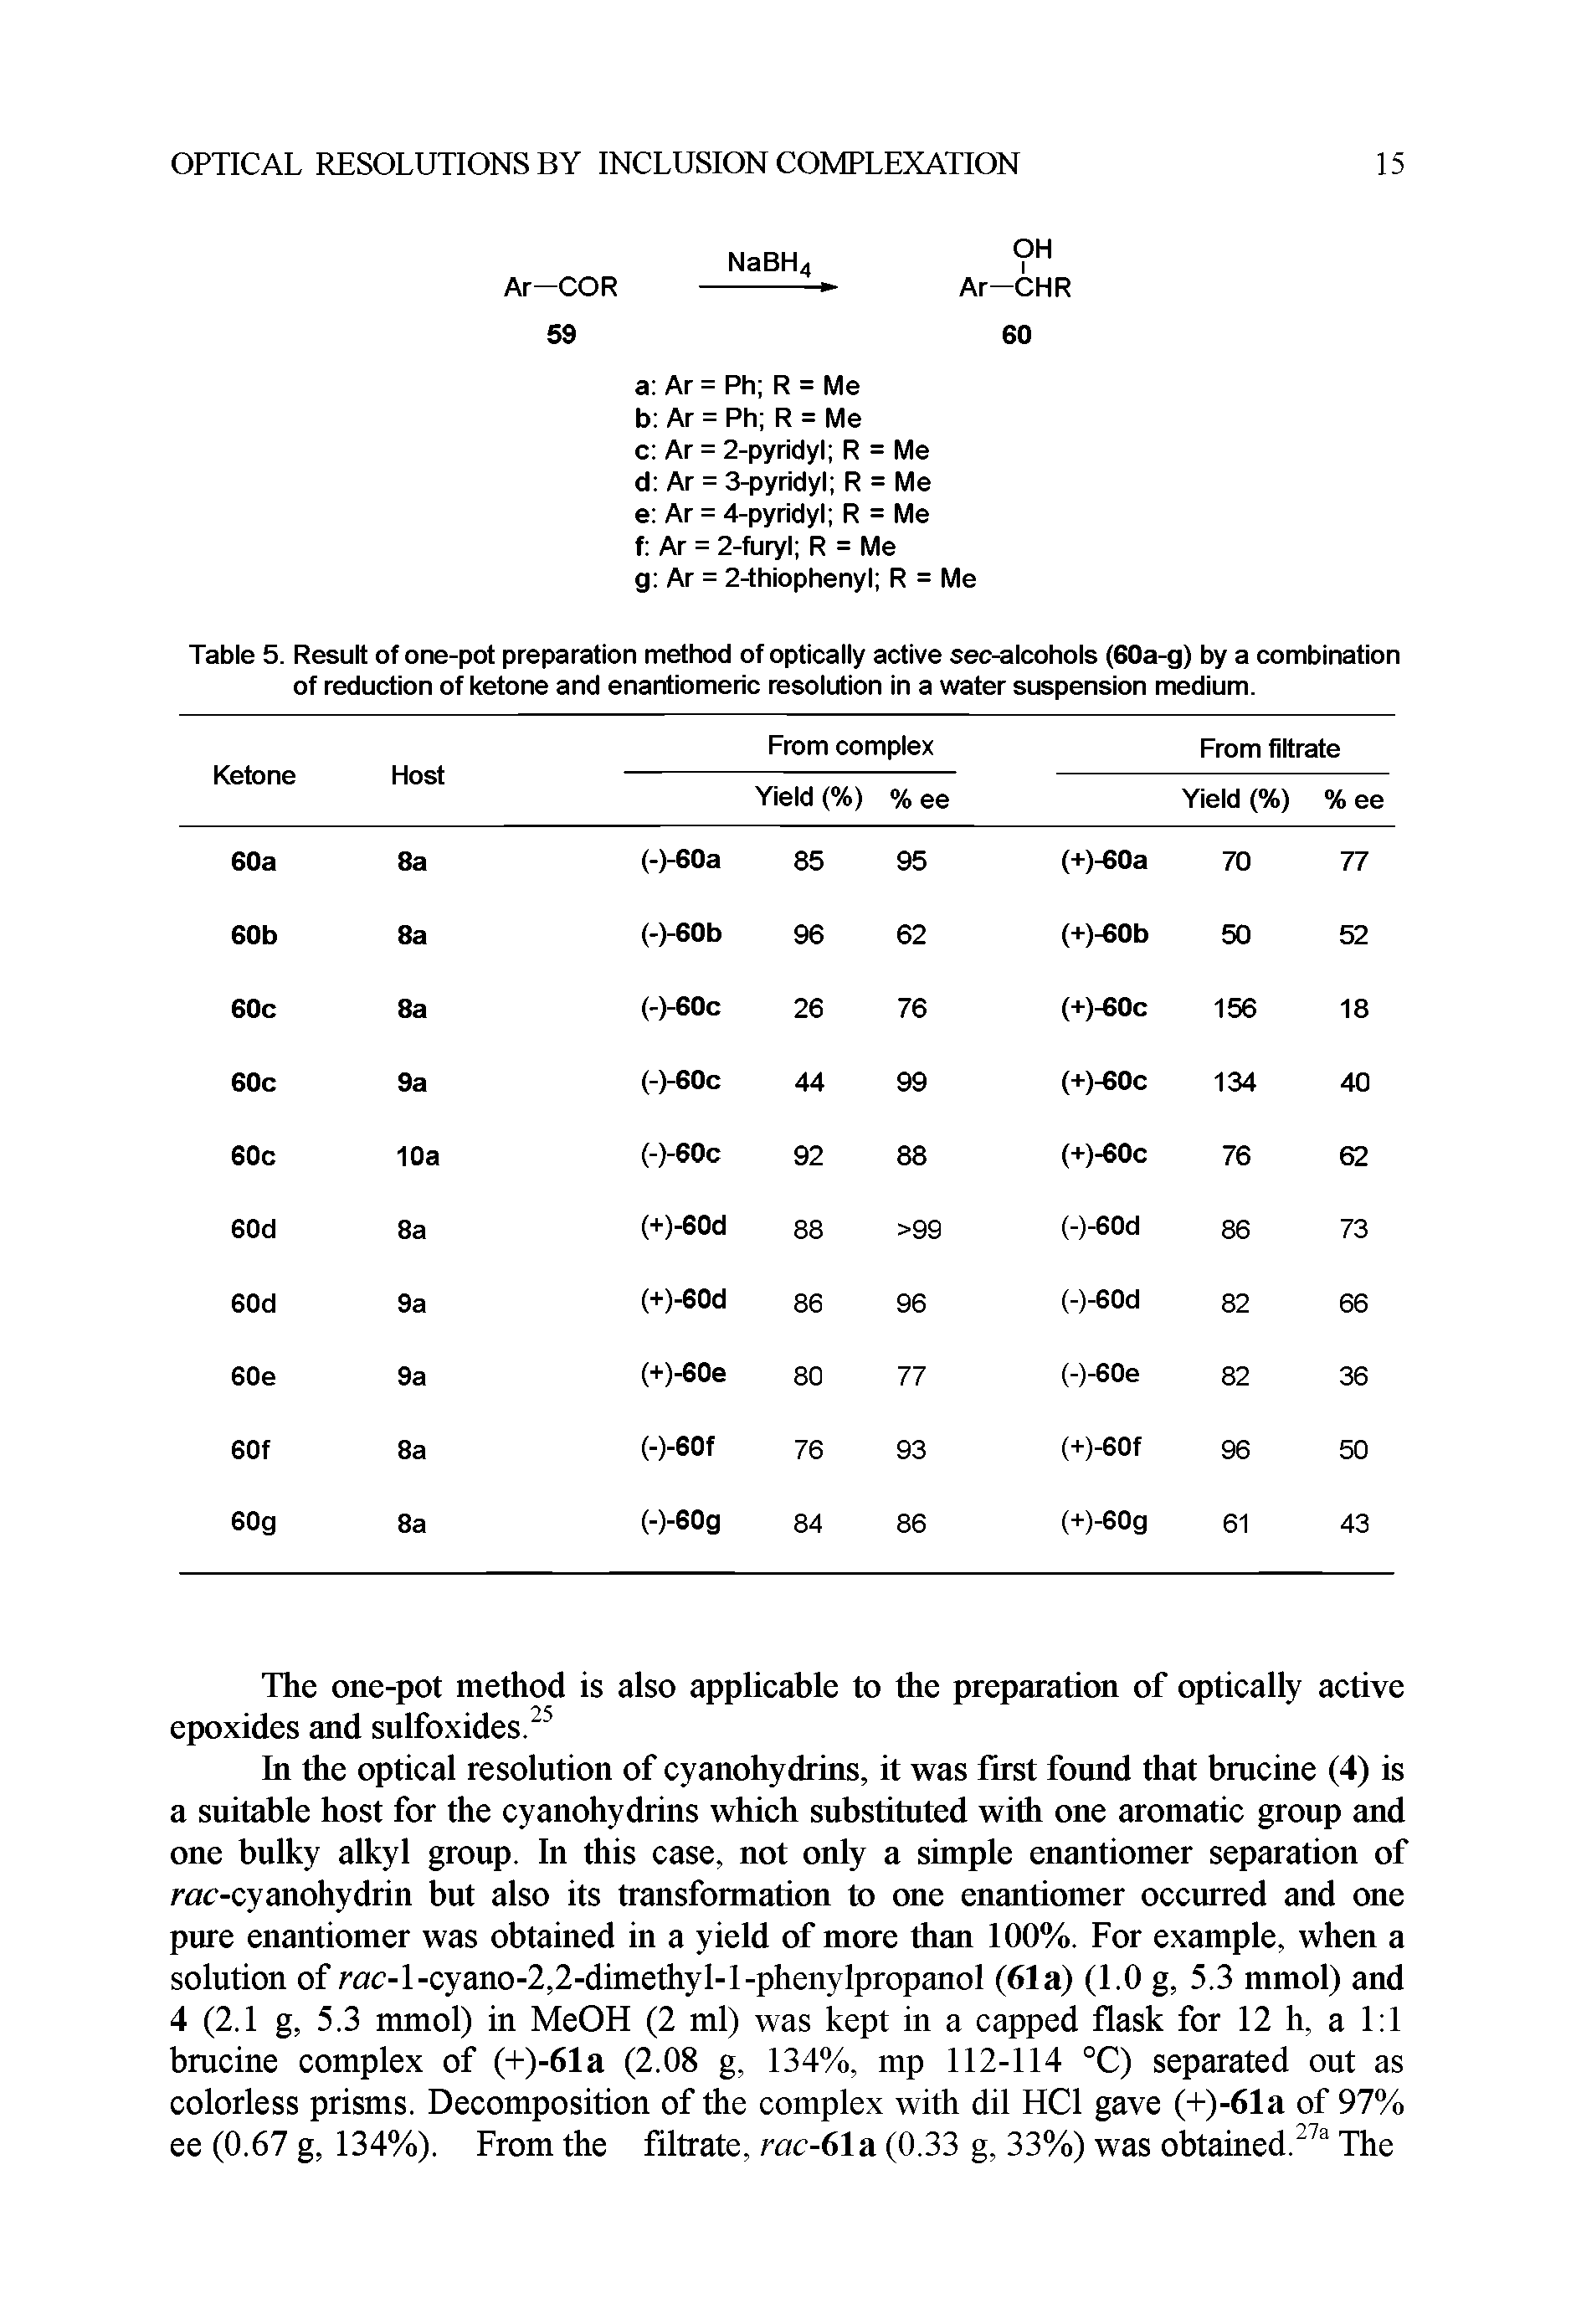 Table 5. Result of one-pot preparation method of optically active sec-alcohols (60a-g) by a combination of reduction of ketone and enantiomeric resolution in a water suspension medium.